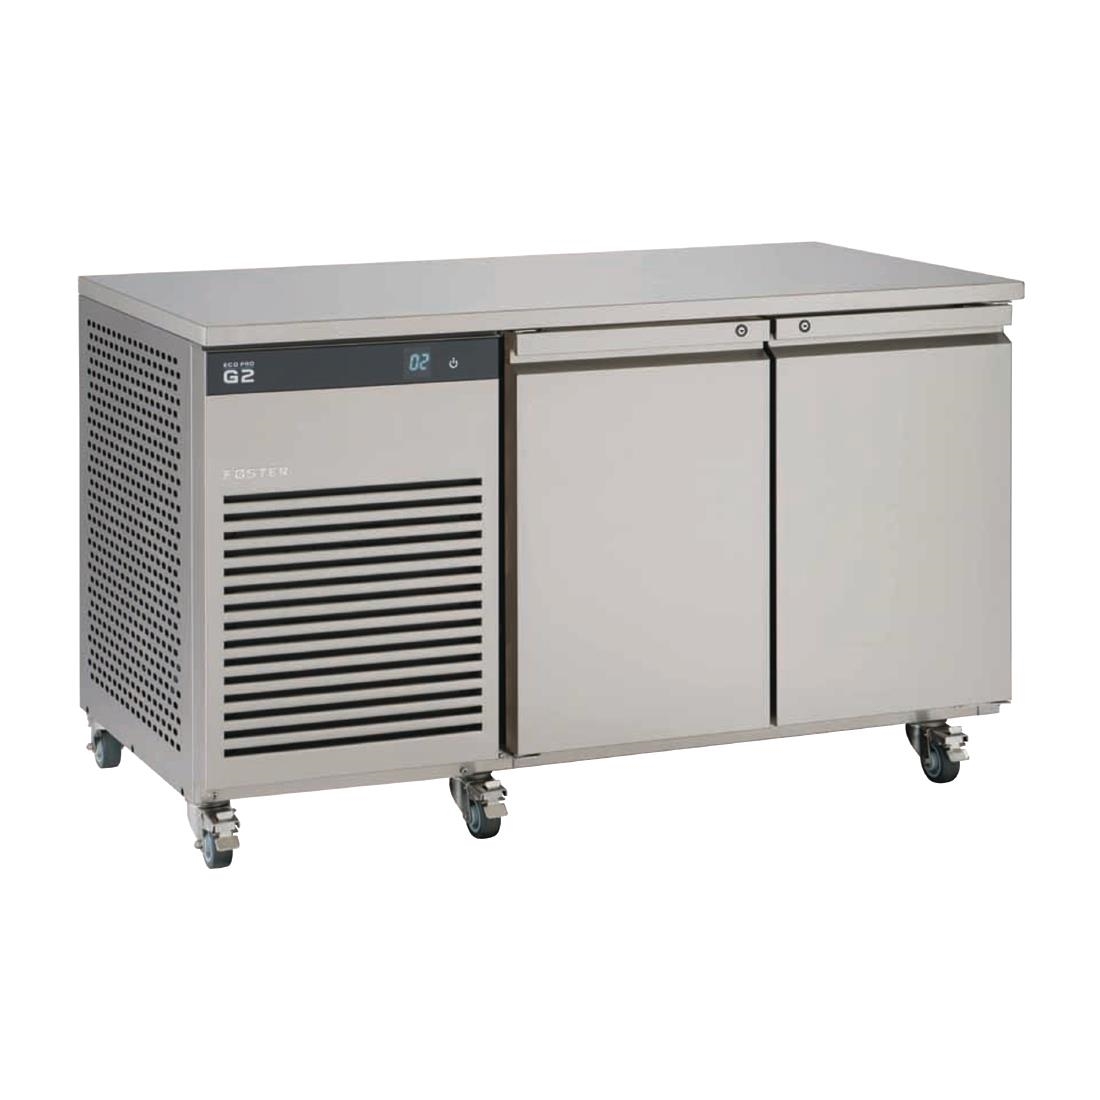 Foster EcoPro G2 Refrigerated Counter EP1/2H 12-102